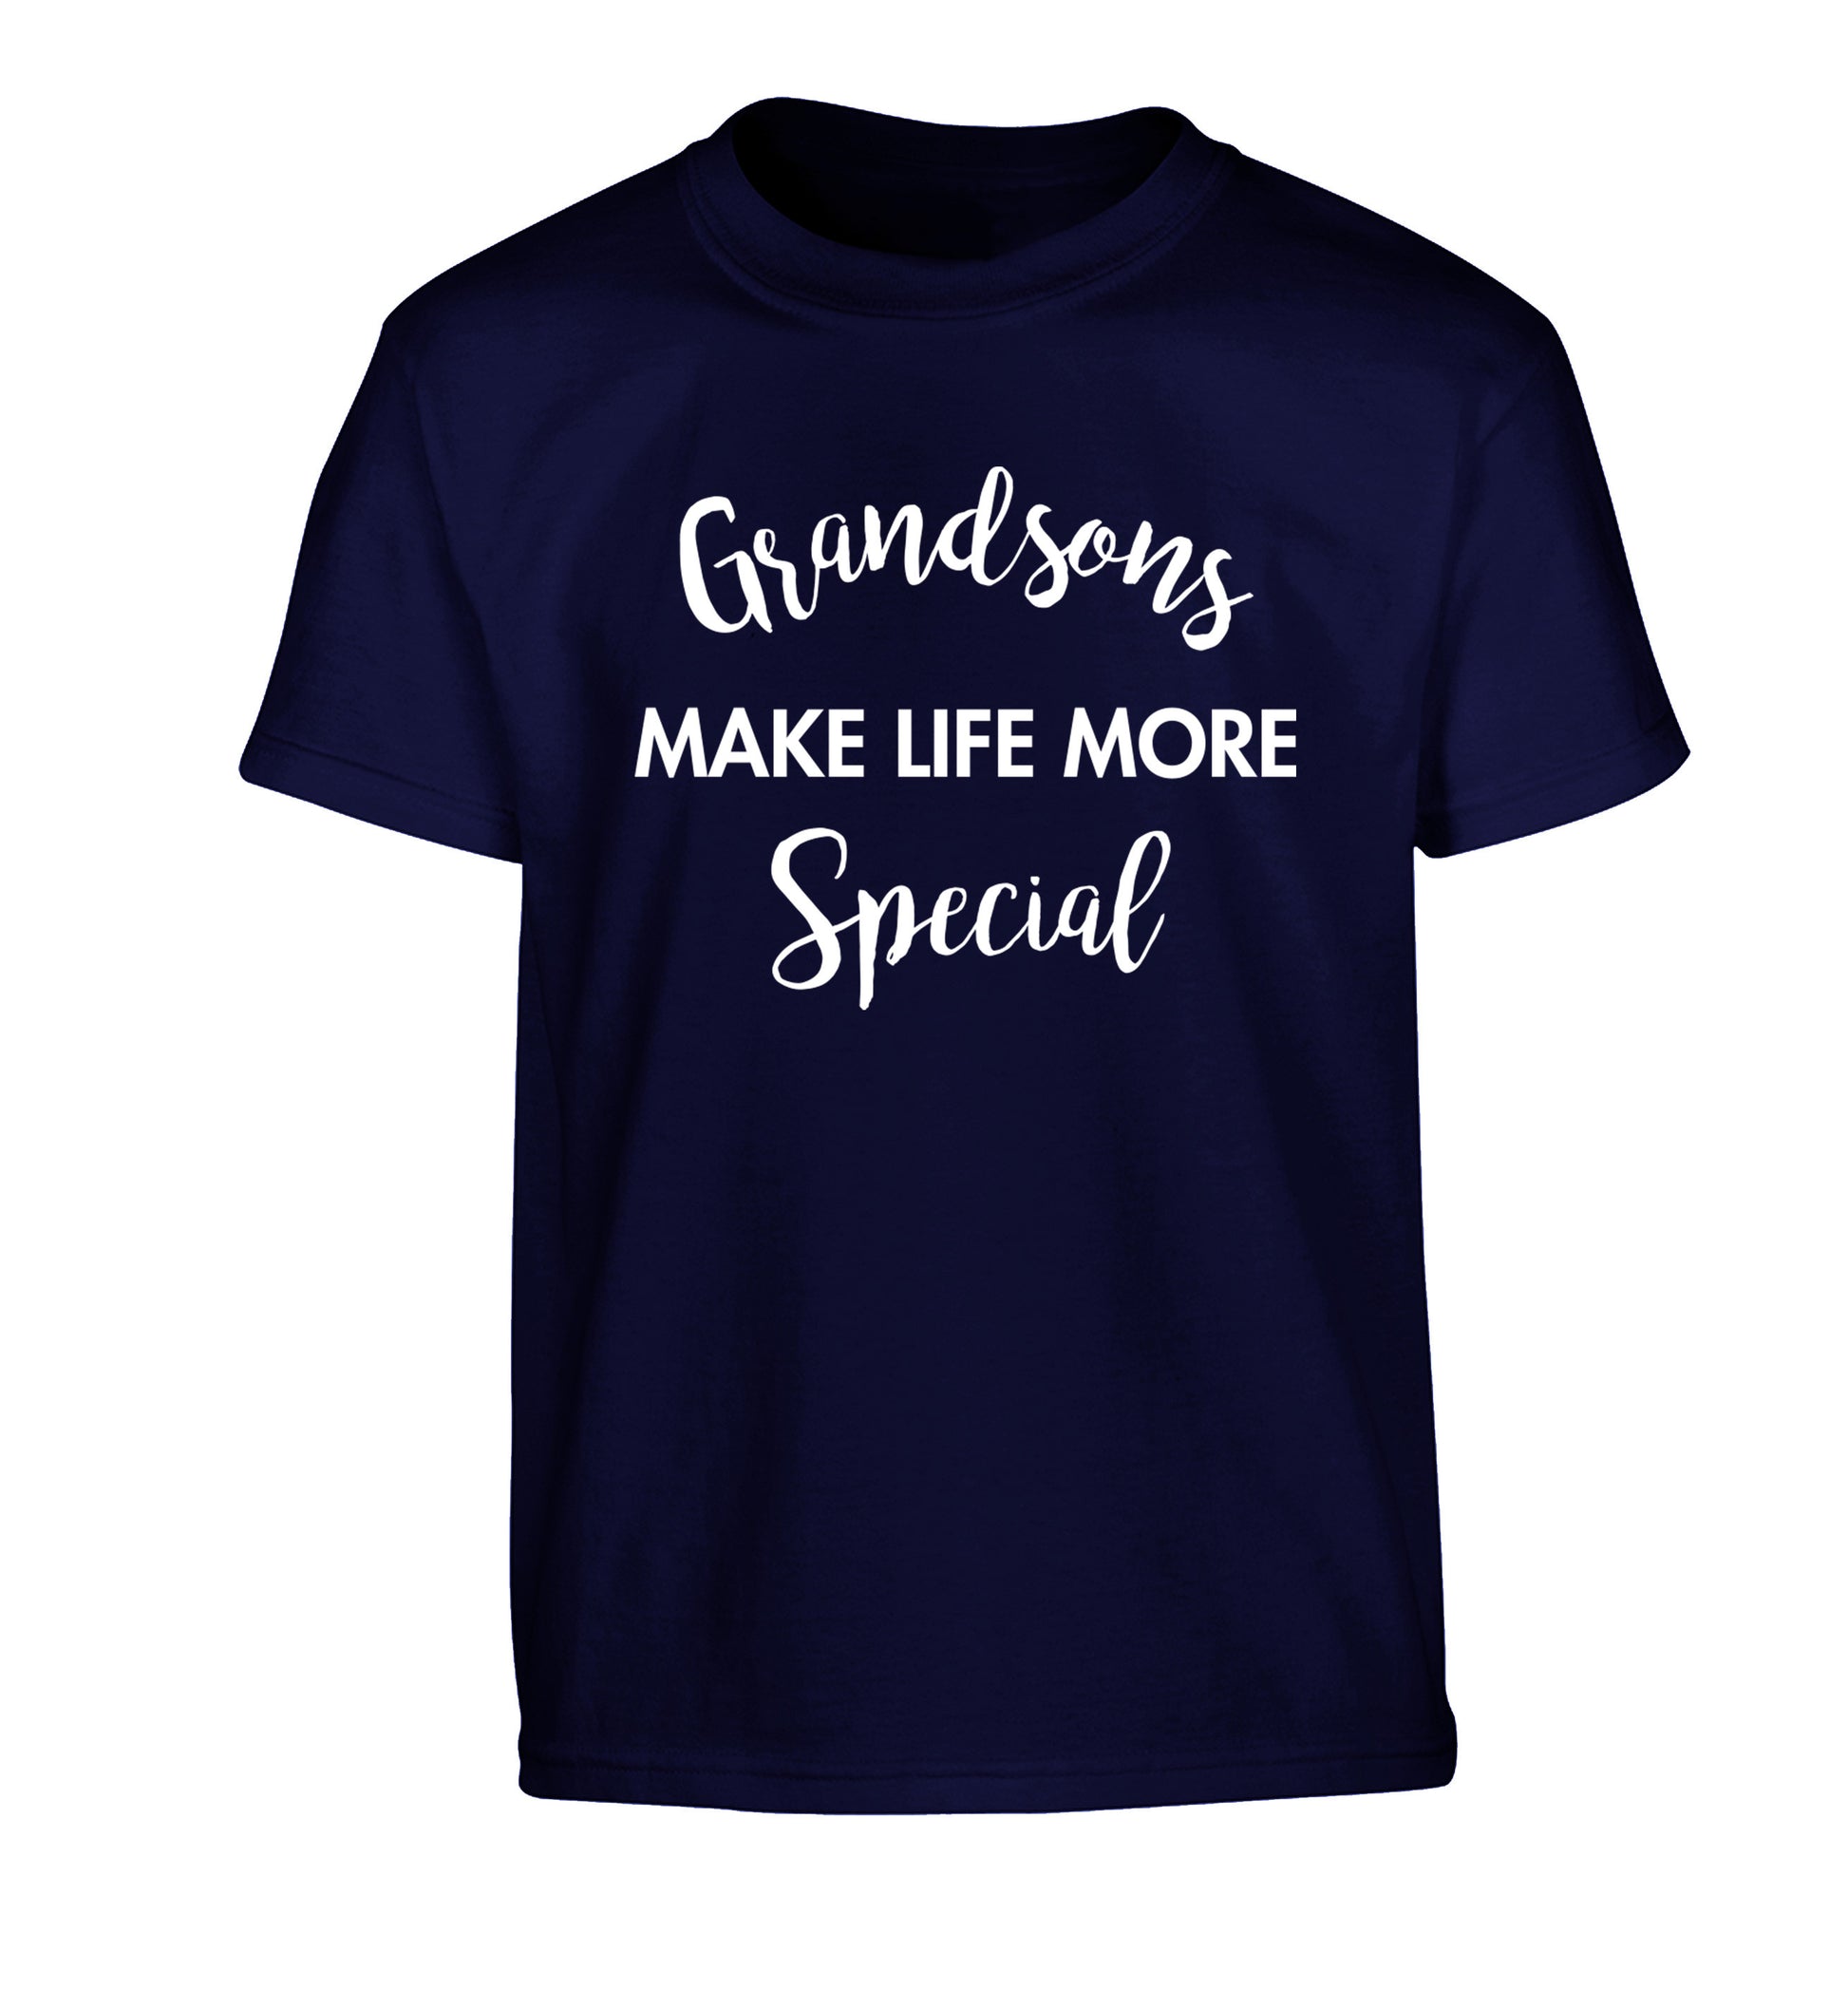 Grandsons make life more special Children's navy Tshirt 12-14 Years